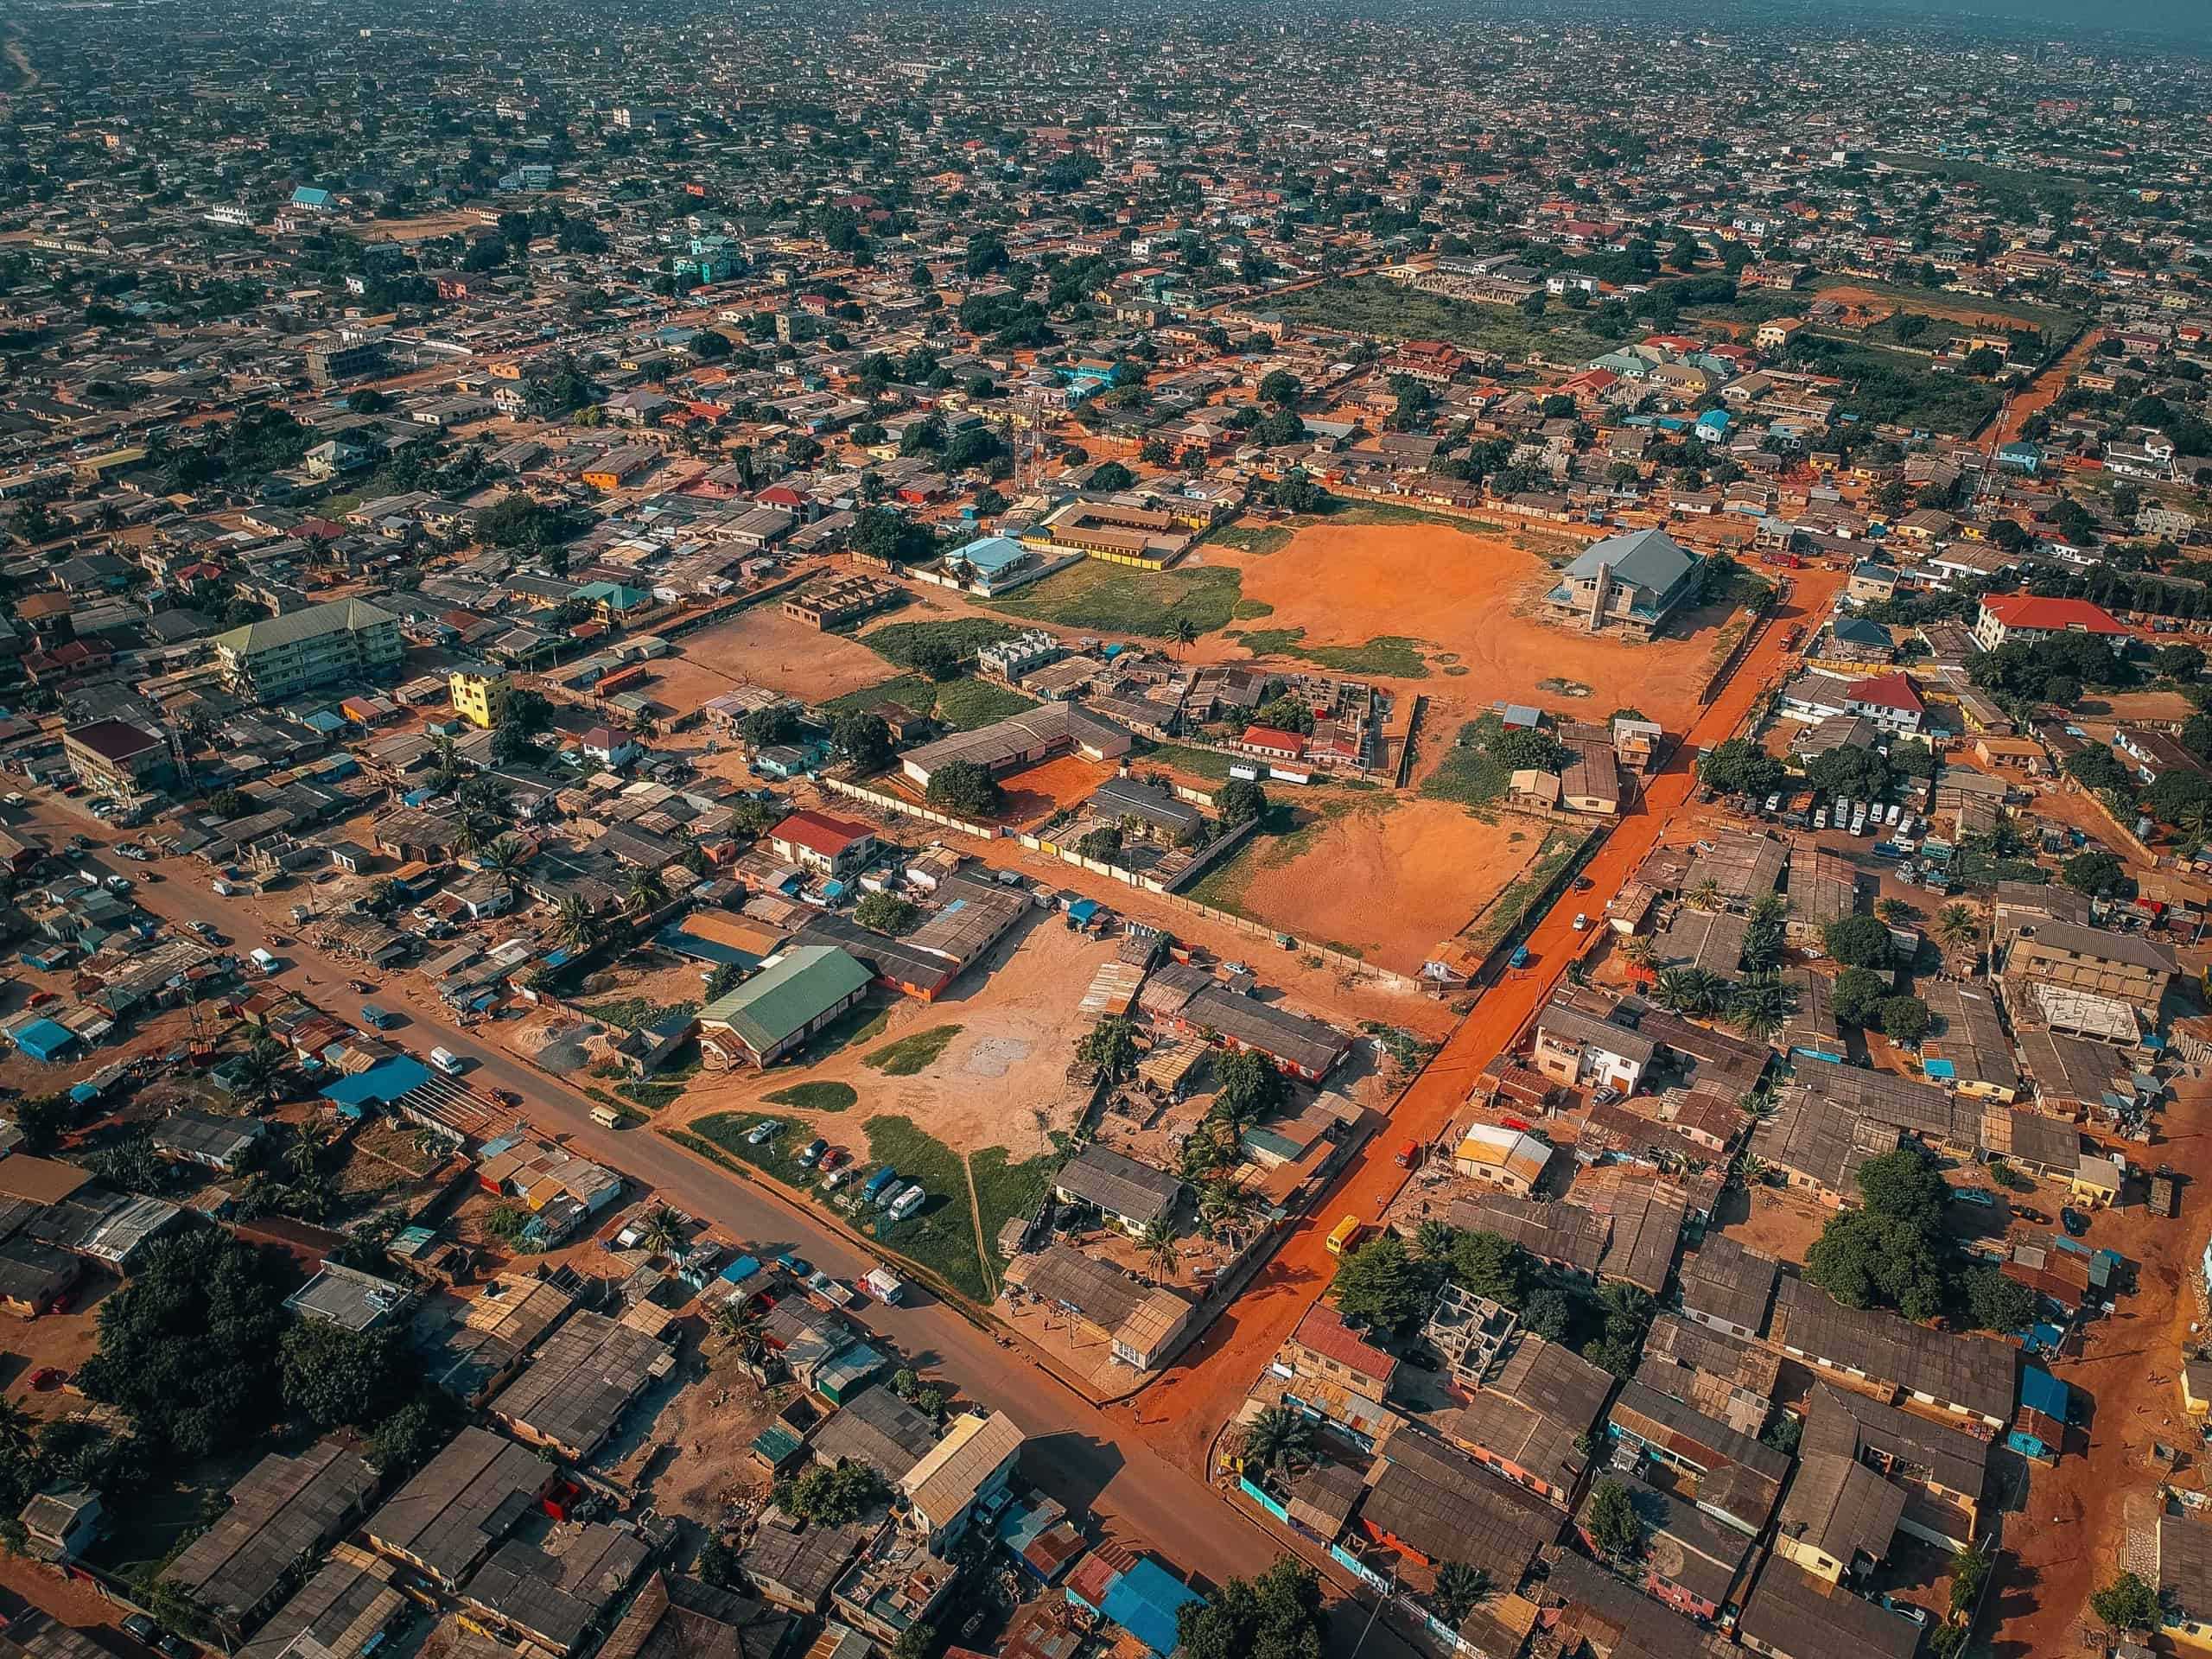 Ariel view of a town in Ghana